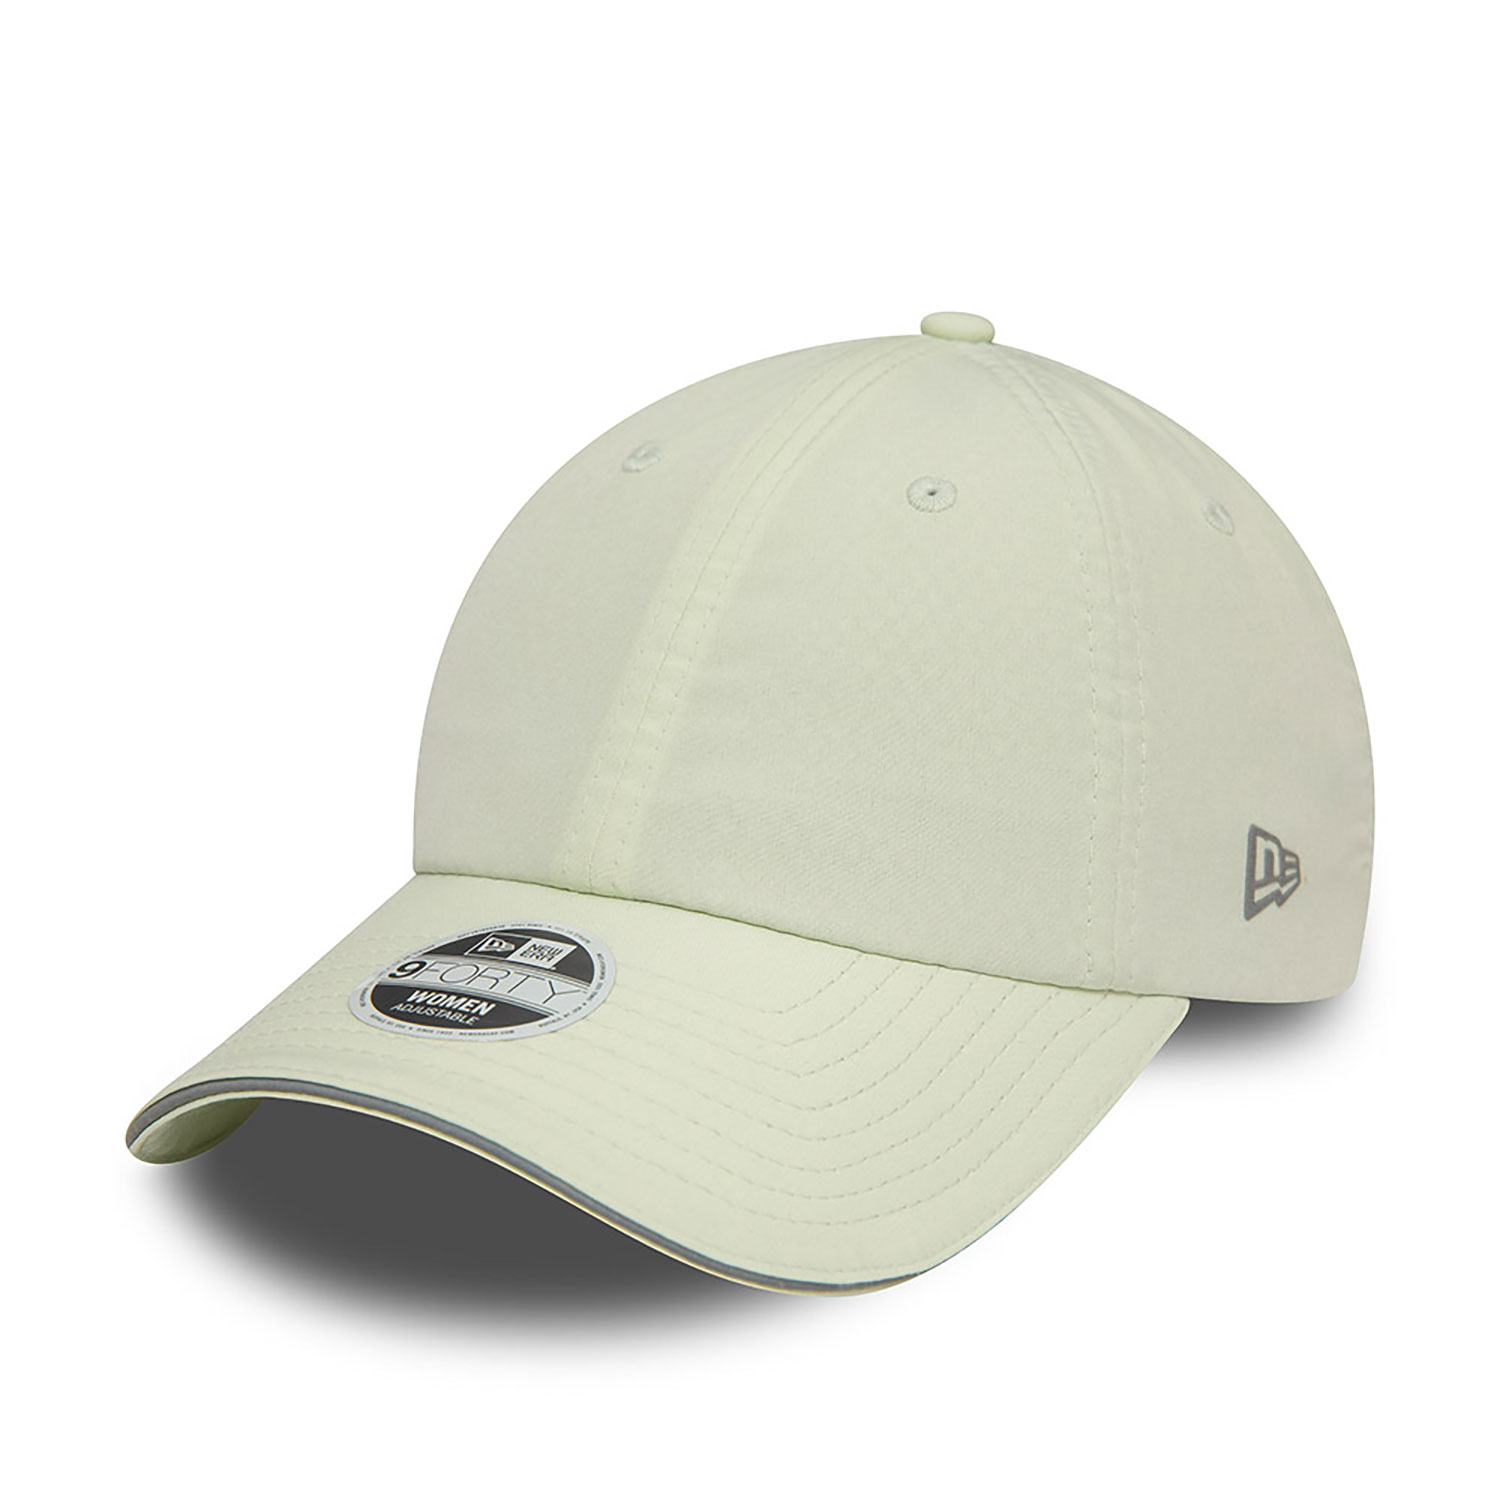 New Era Womens Ponytail Open Back Mint Green 9FORTY Adjustable Cap